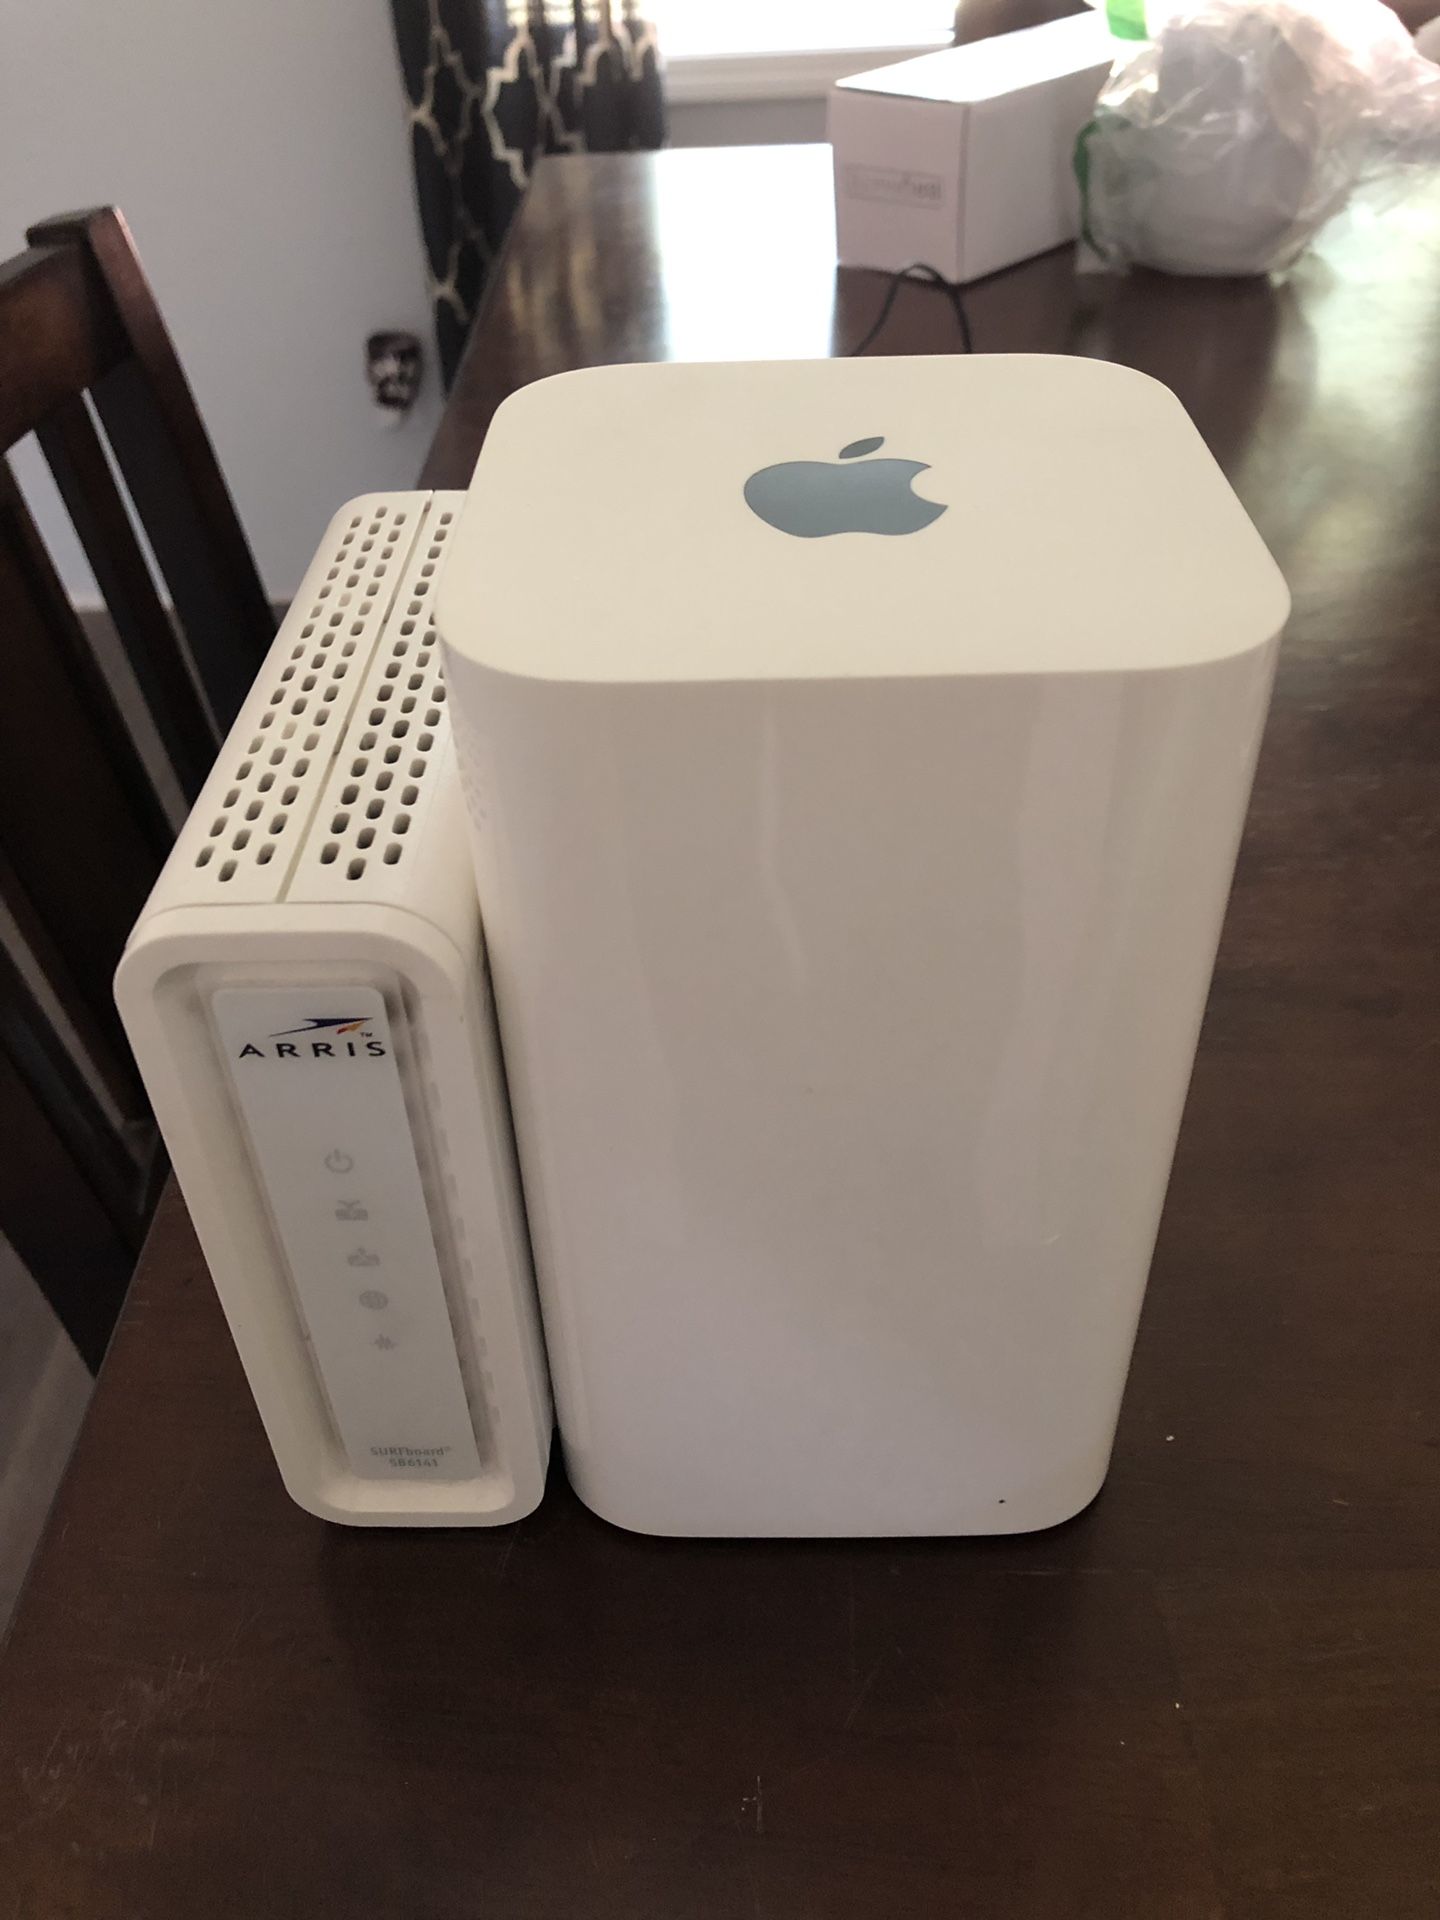 Apple AirPort Extreme Router (w/ Arris Surfboard modem)